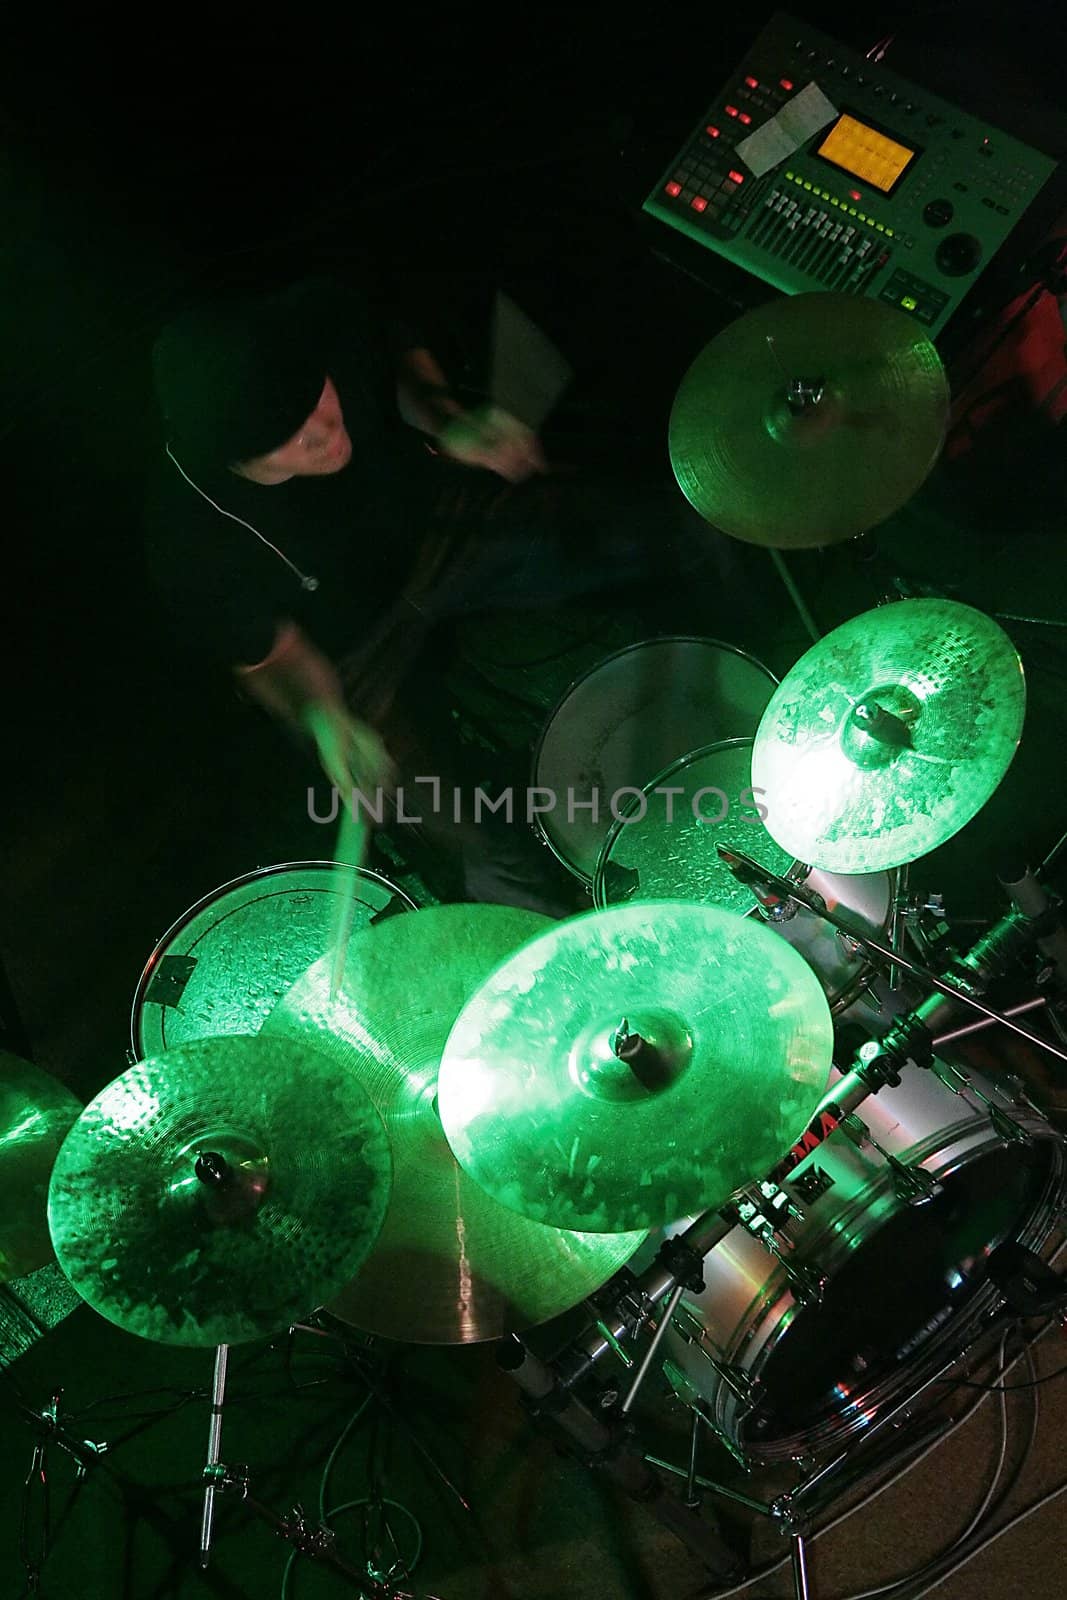 drummer in shadow, drums lighted with green colour